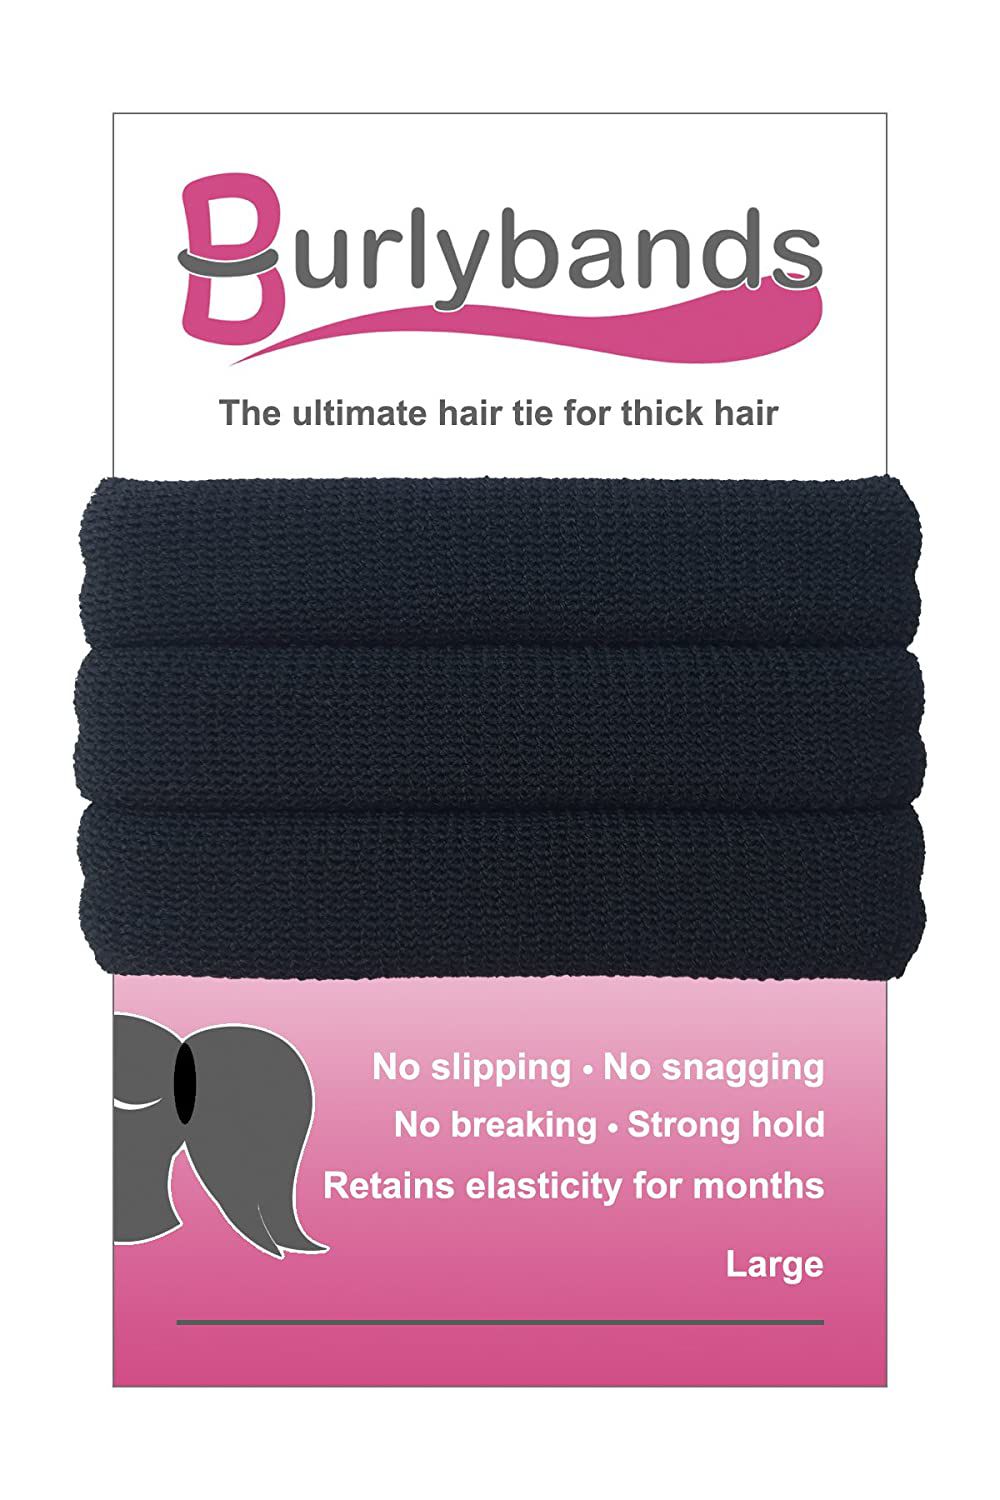 Burlybands Hair Ties for Thick Hair